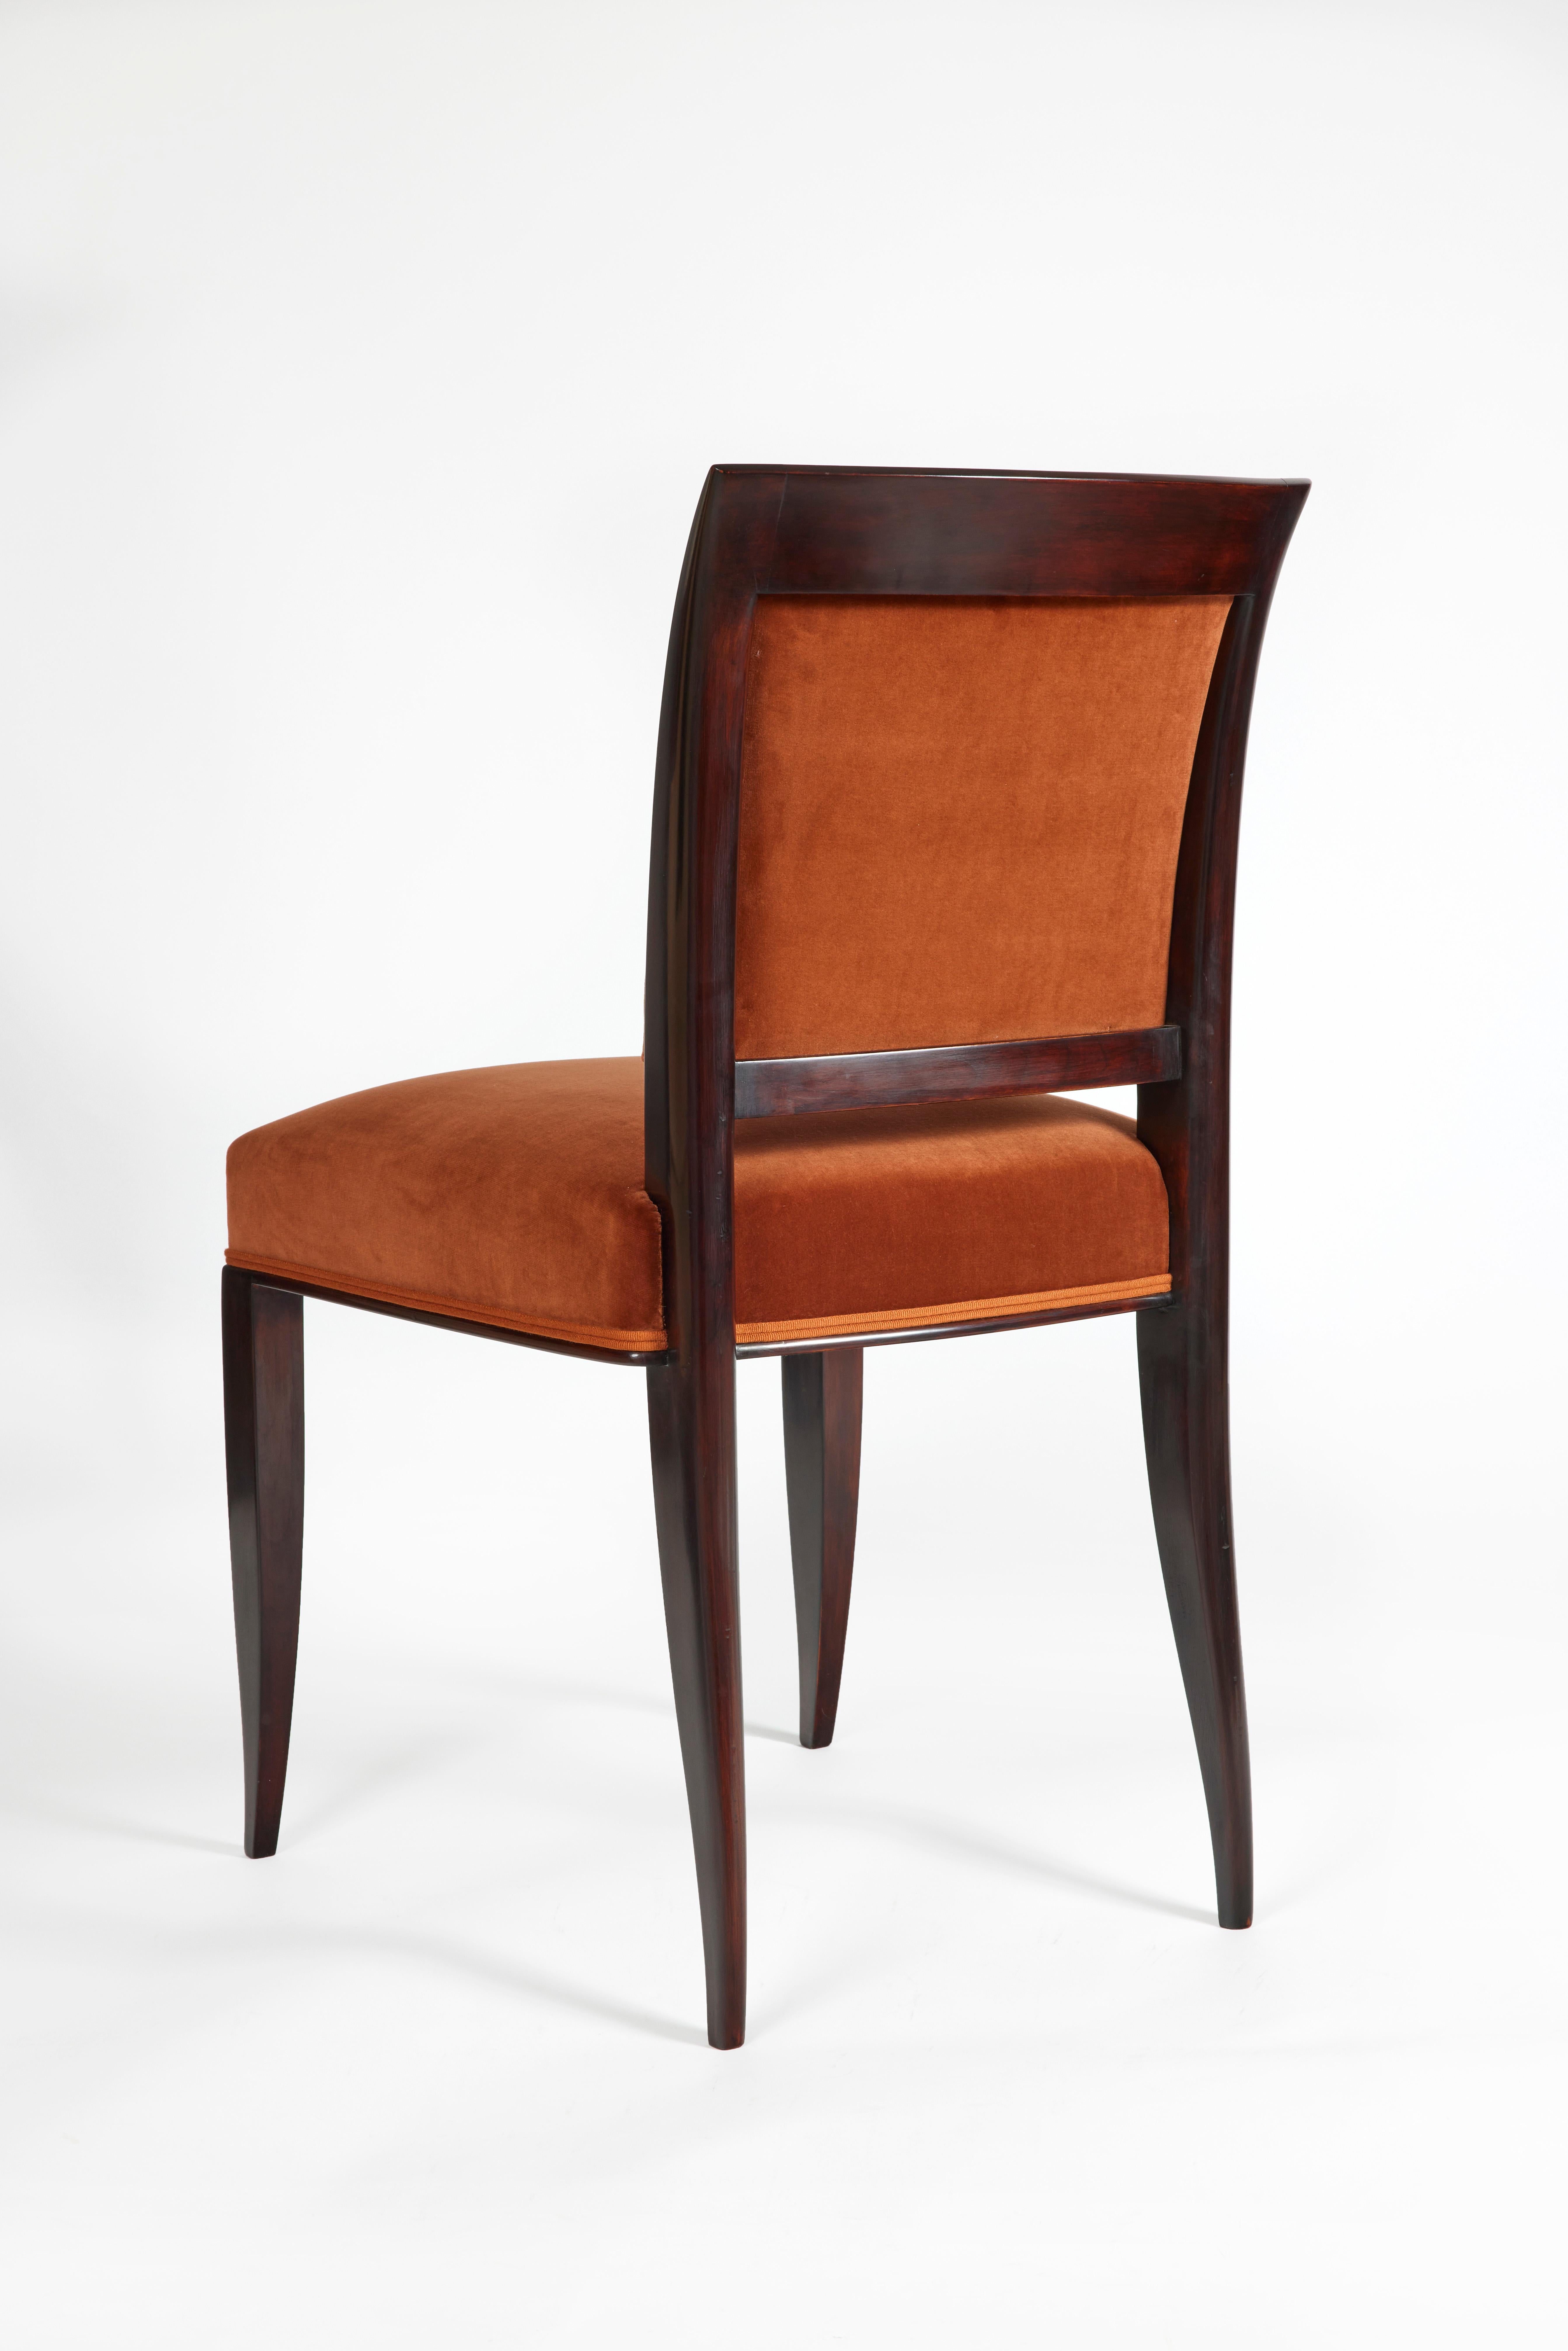 Set of chairs for the dining room. 
Two armchairs in stained beech with legs forming curved sabers extending to the front in arm supports, 
flared arms and slightly hollowed out in the upper part, curved back forming a return to the outside, seat